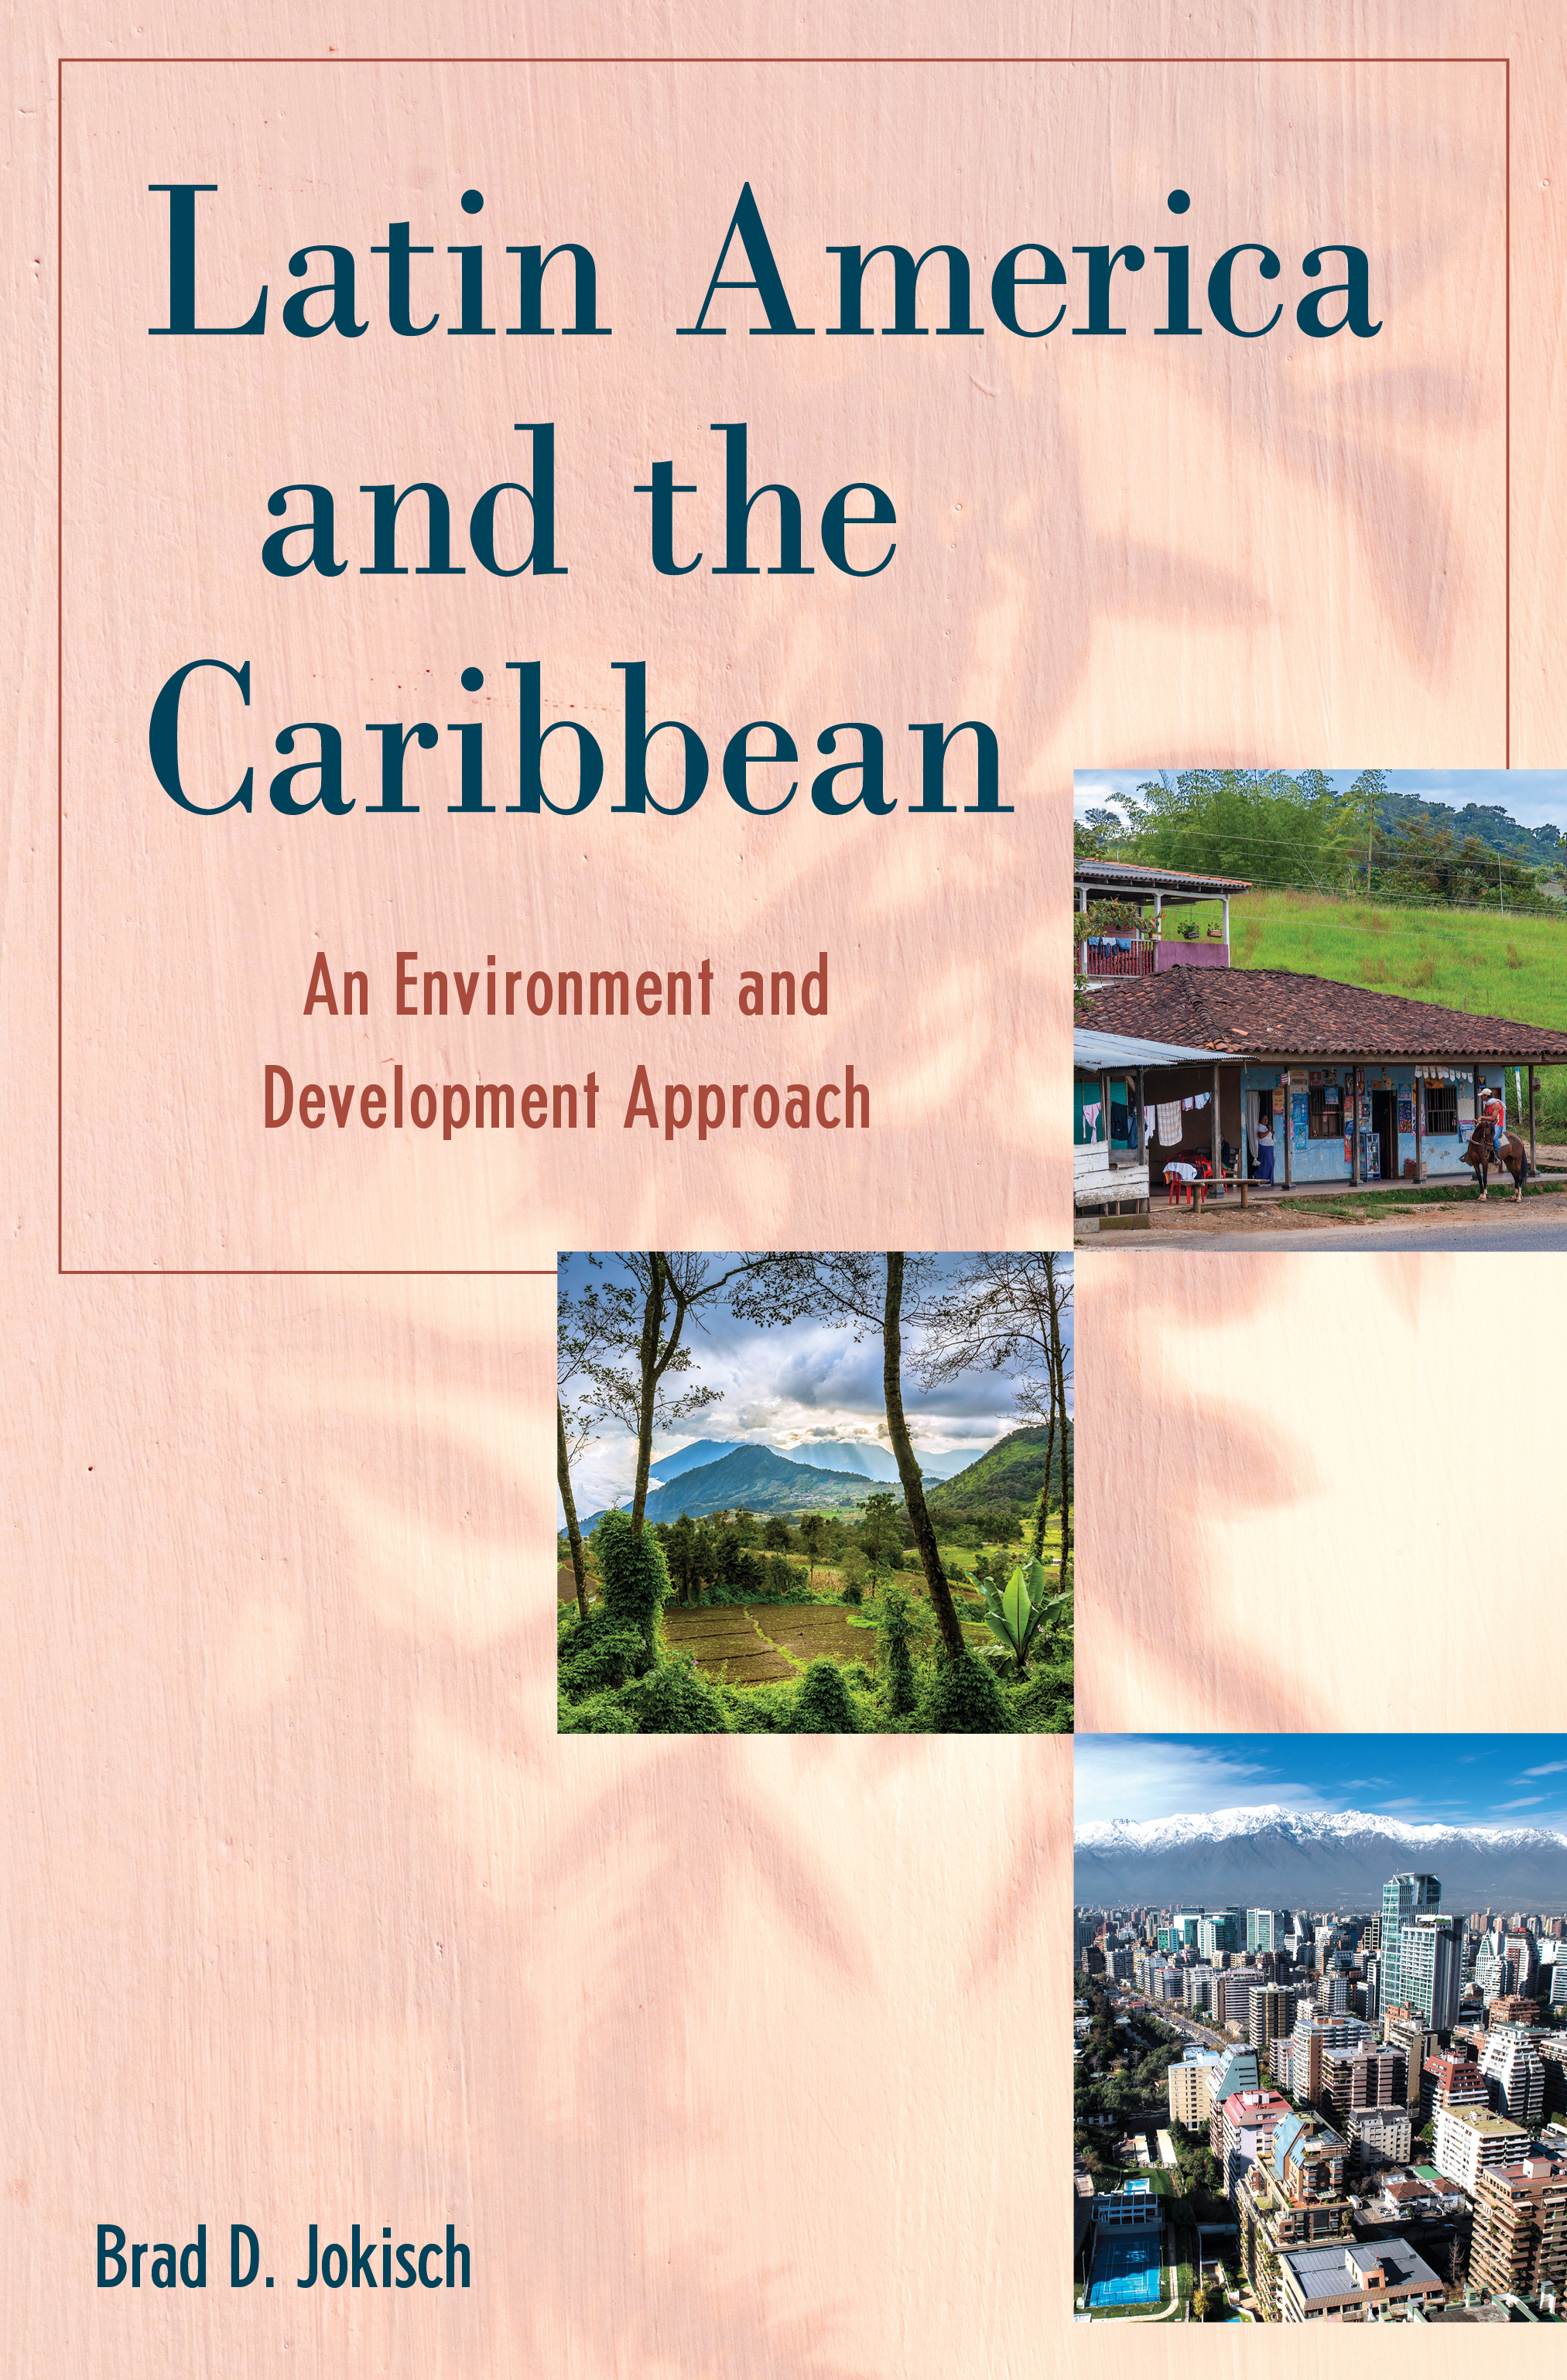 Latin America and the Caribbean: An Environment and Development Approach